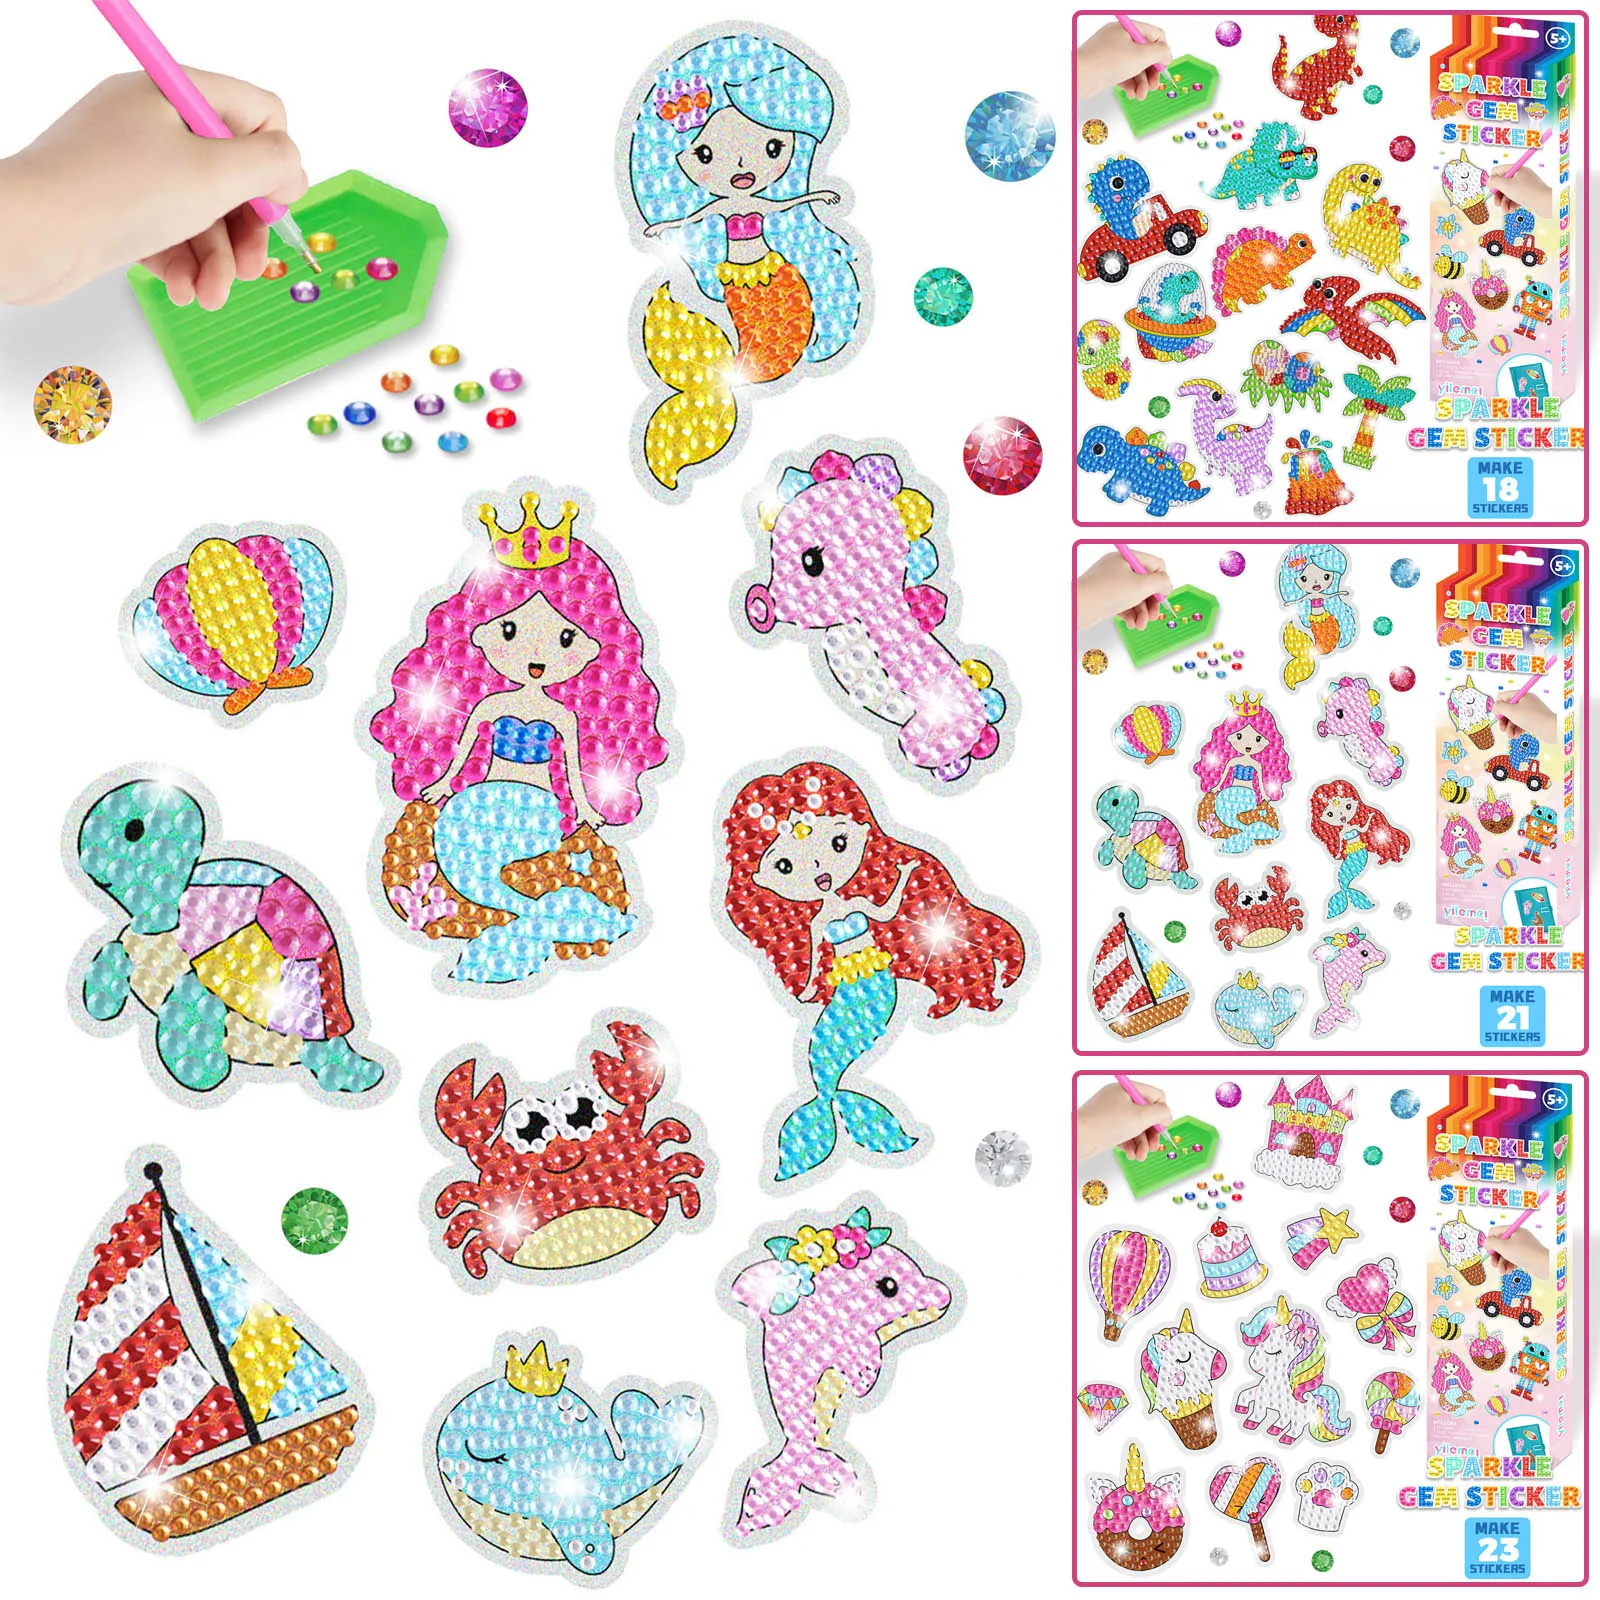 5D DIY Diamond Painting Sticker Kit for Kids Cute Pattern Handmade Sticker Paint Ornament Arts Crafts Gifts for Girls Boys abstract pattern round drill diamond painting 40 80cm big size